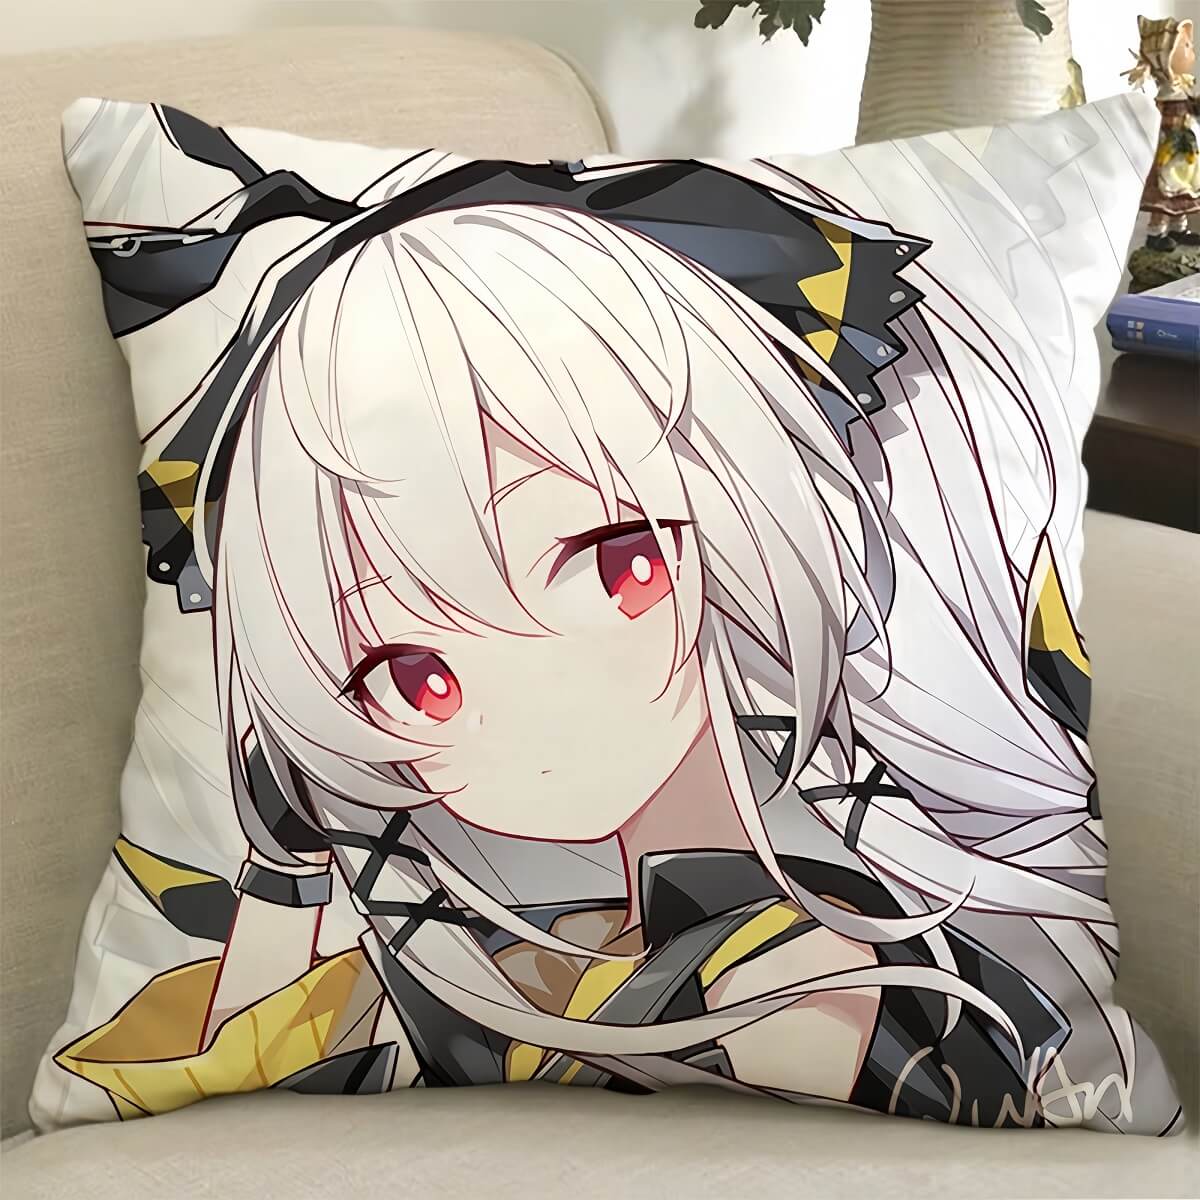 Arknights Weedy pillow